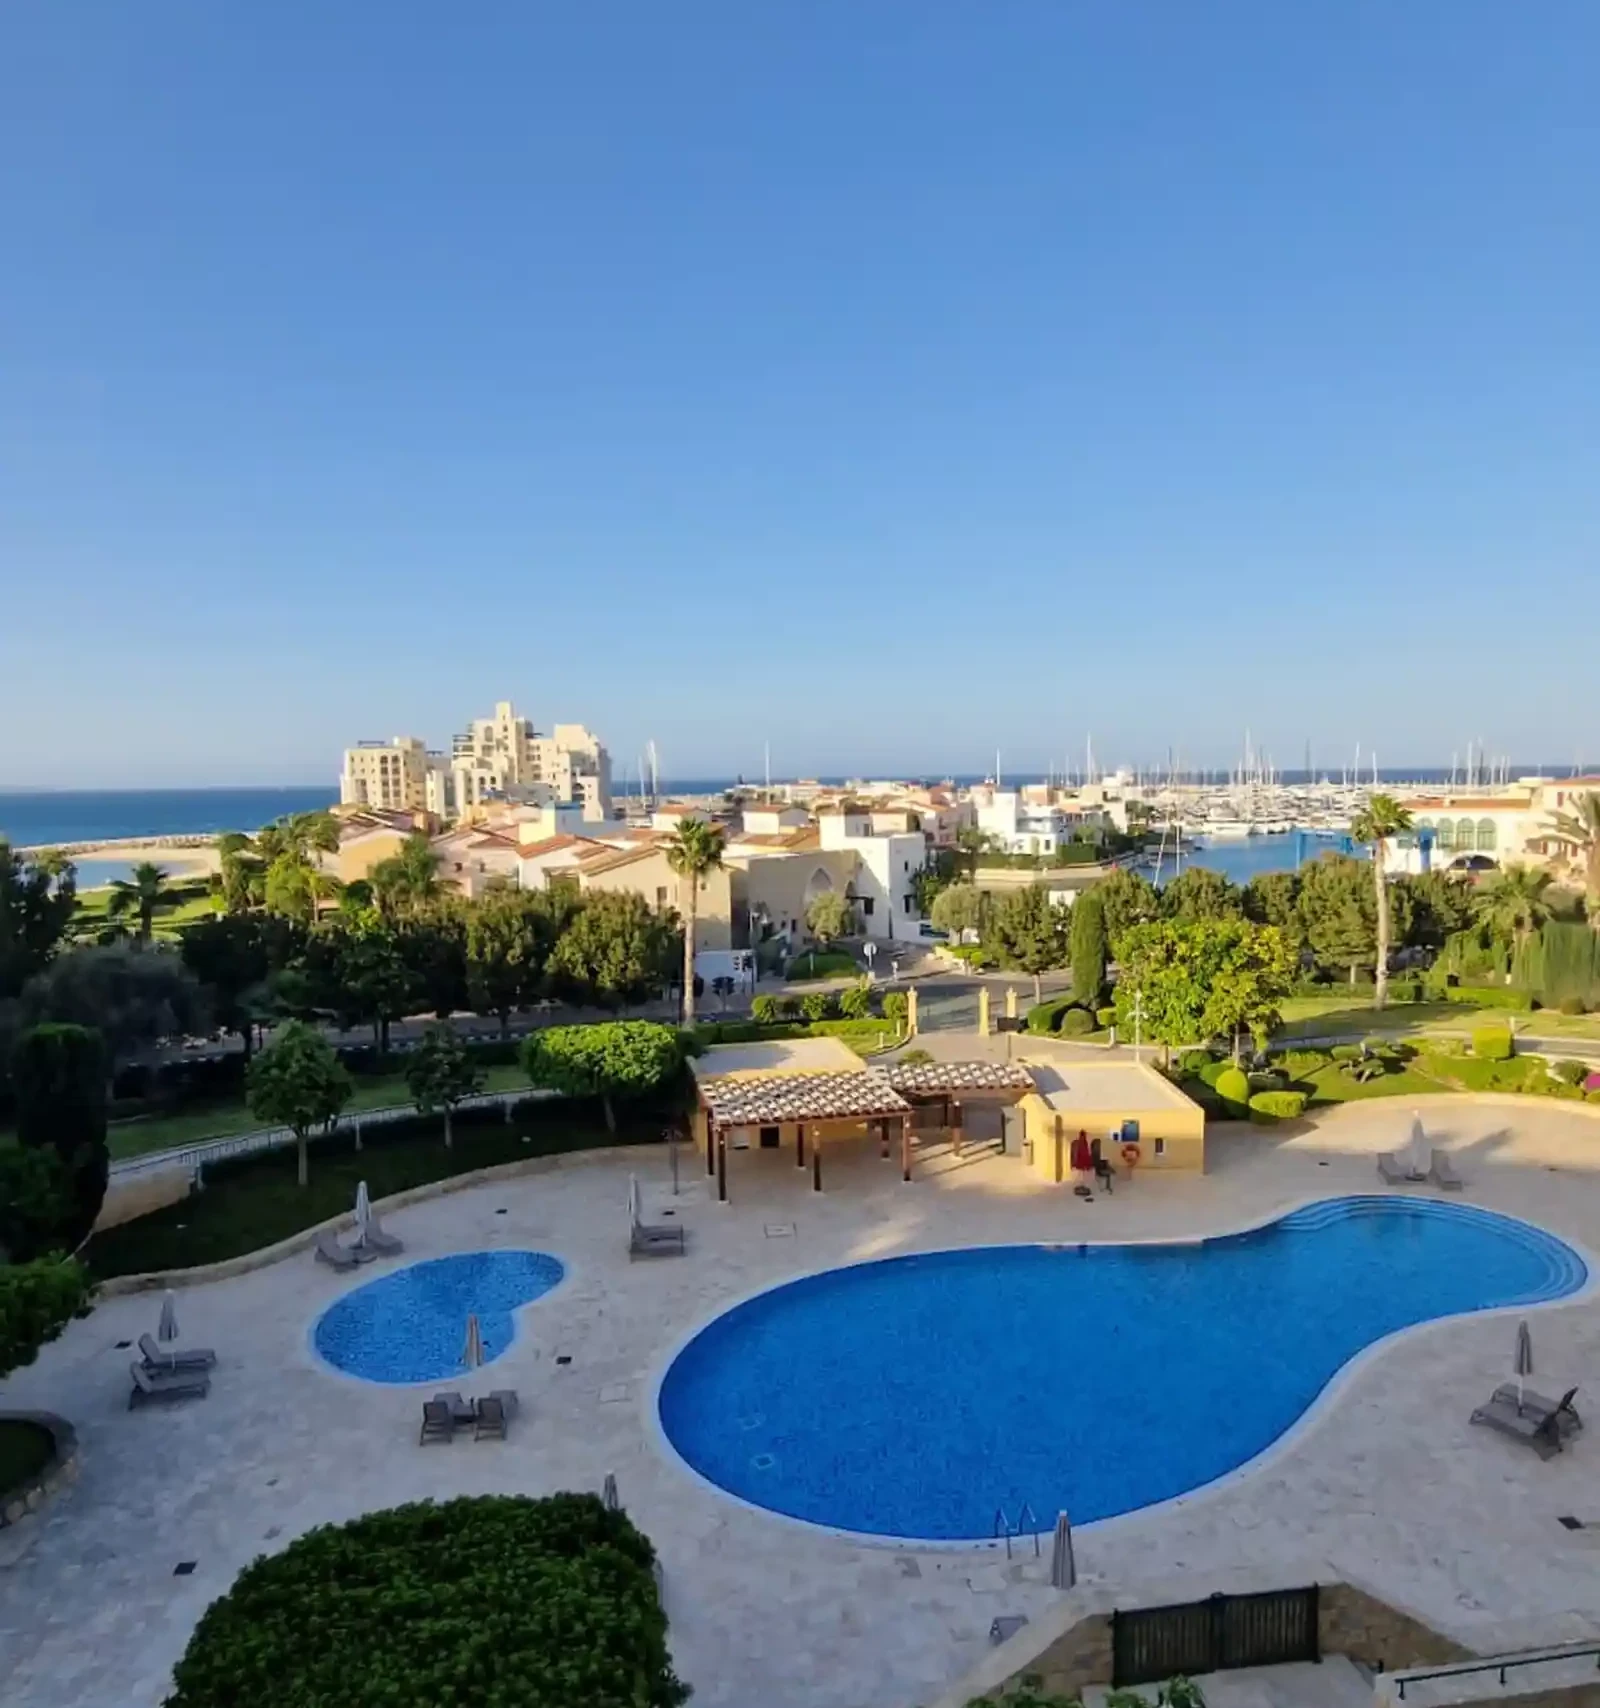 2-bedroom apartment fоr sаle €1.100.000, image 1